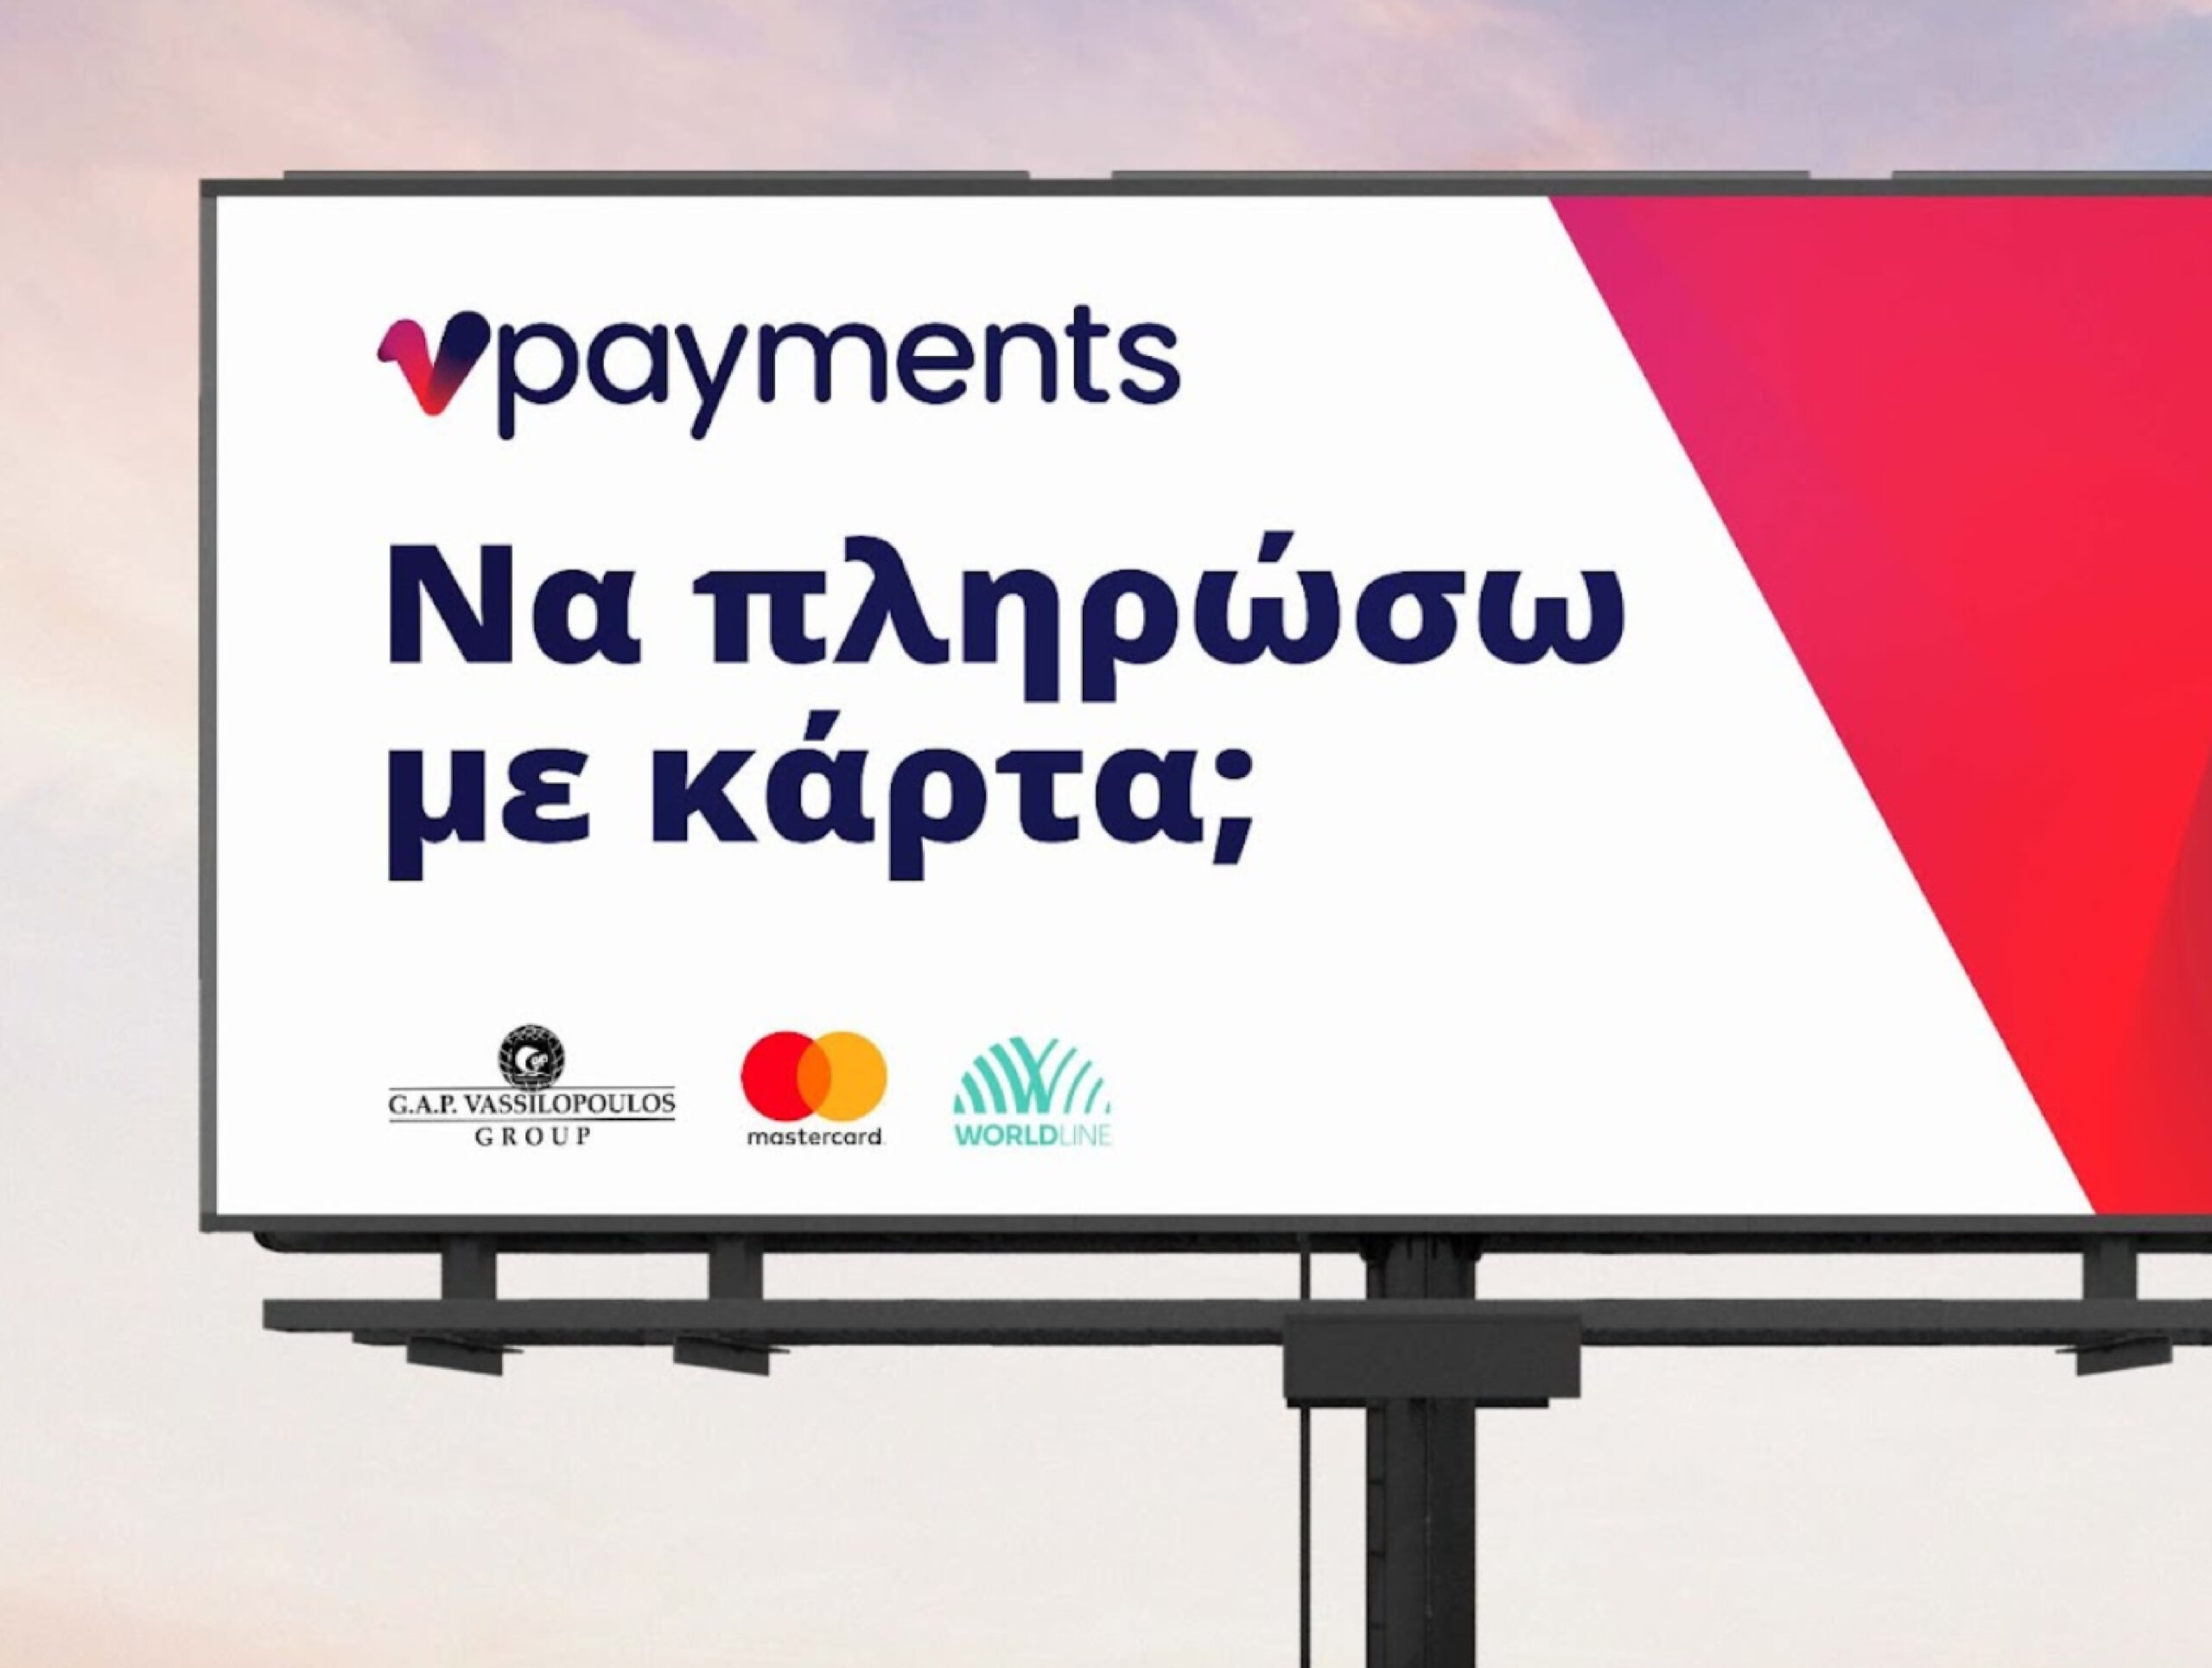 Want to pay by card? VPayments